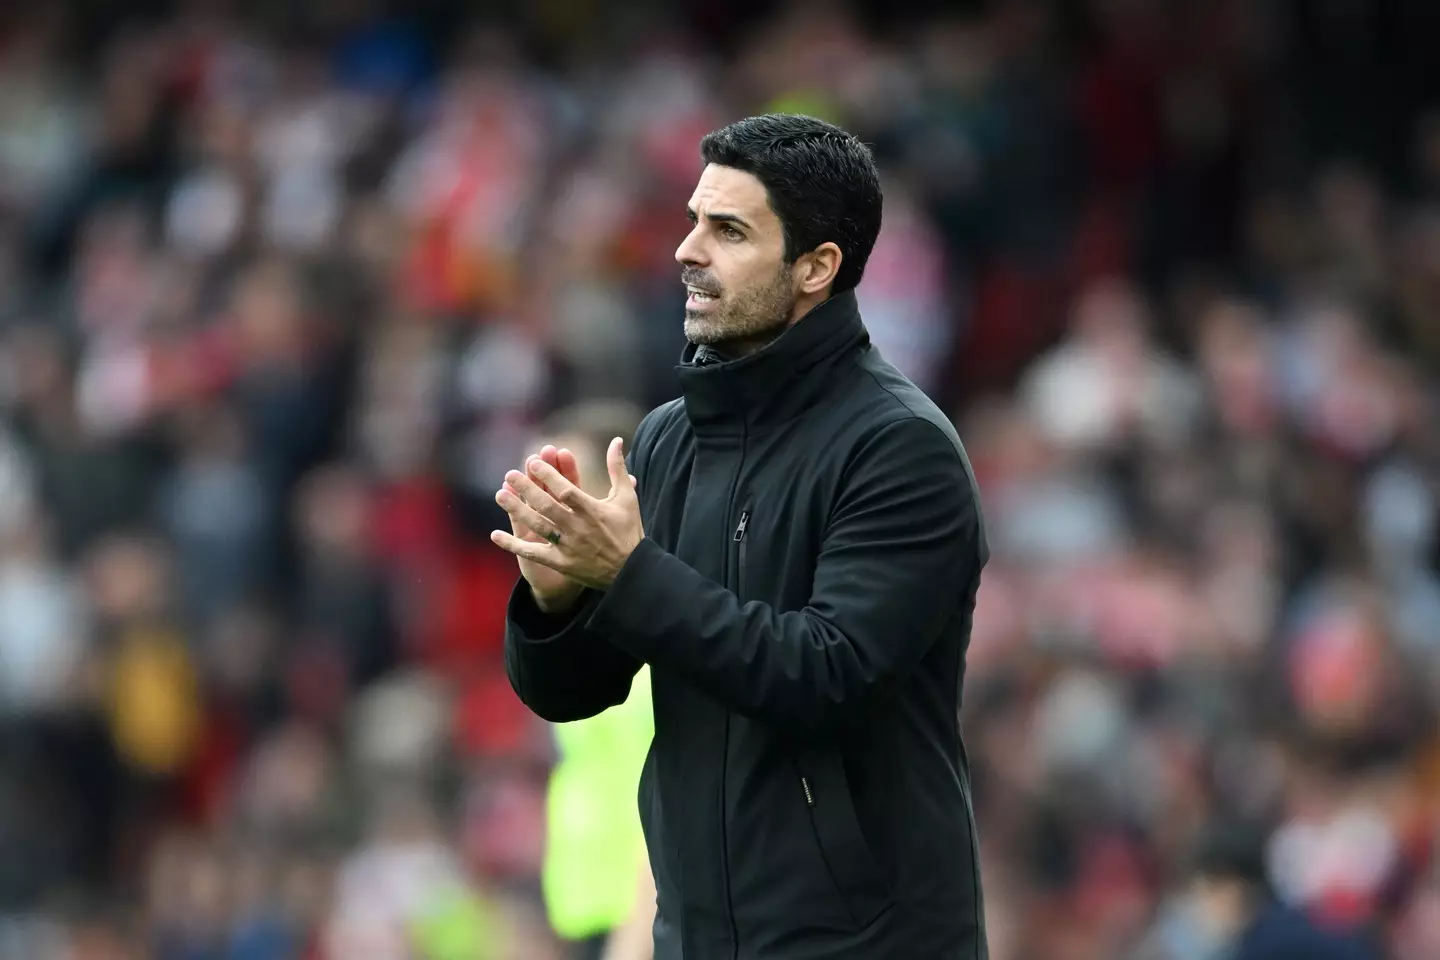 Arteta insisted Arsenal must keep believing after their Premier League loss to Villa (Getty)